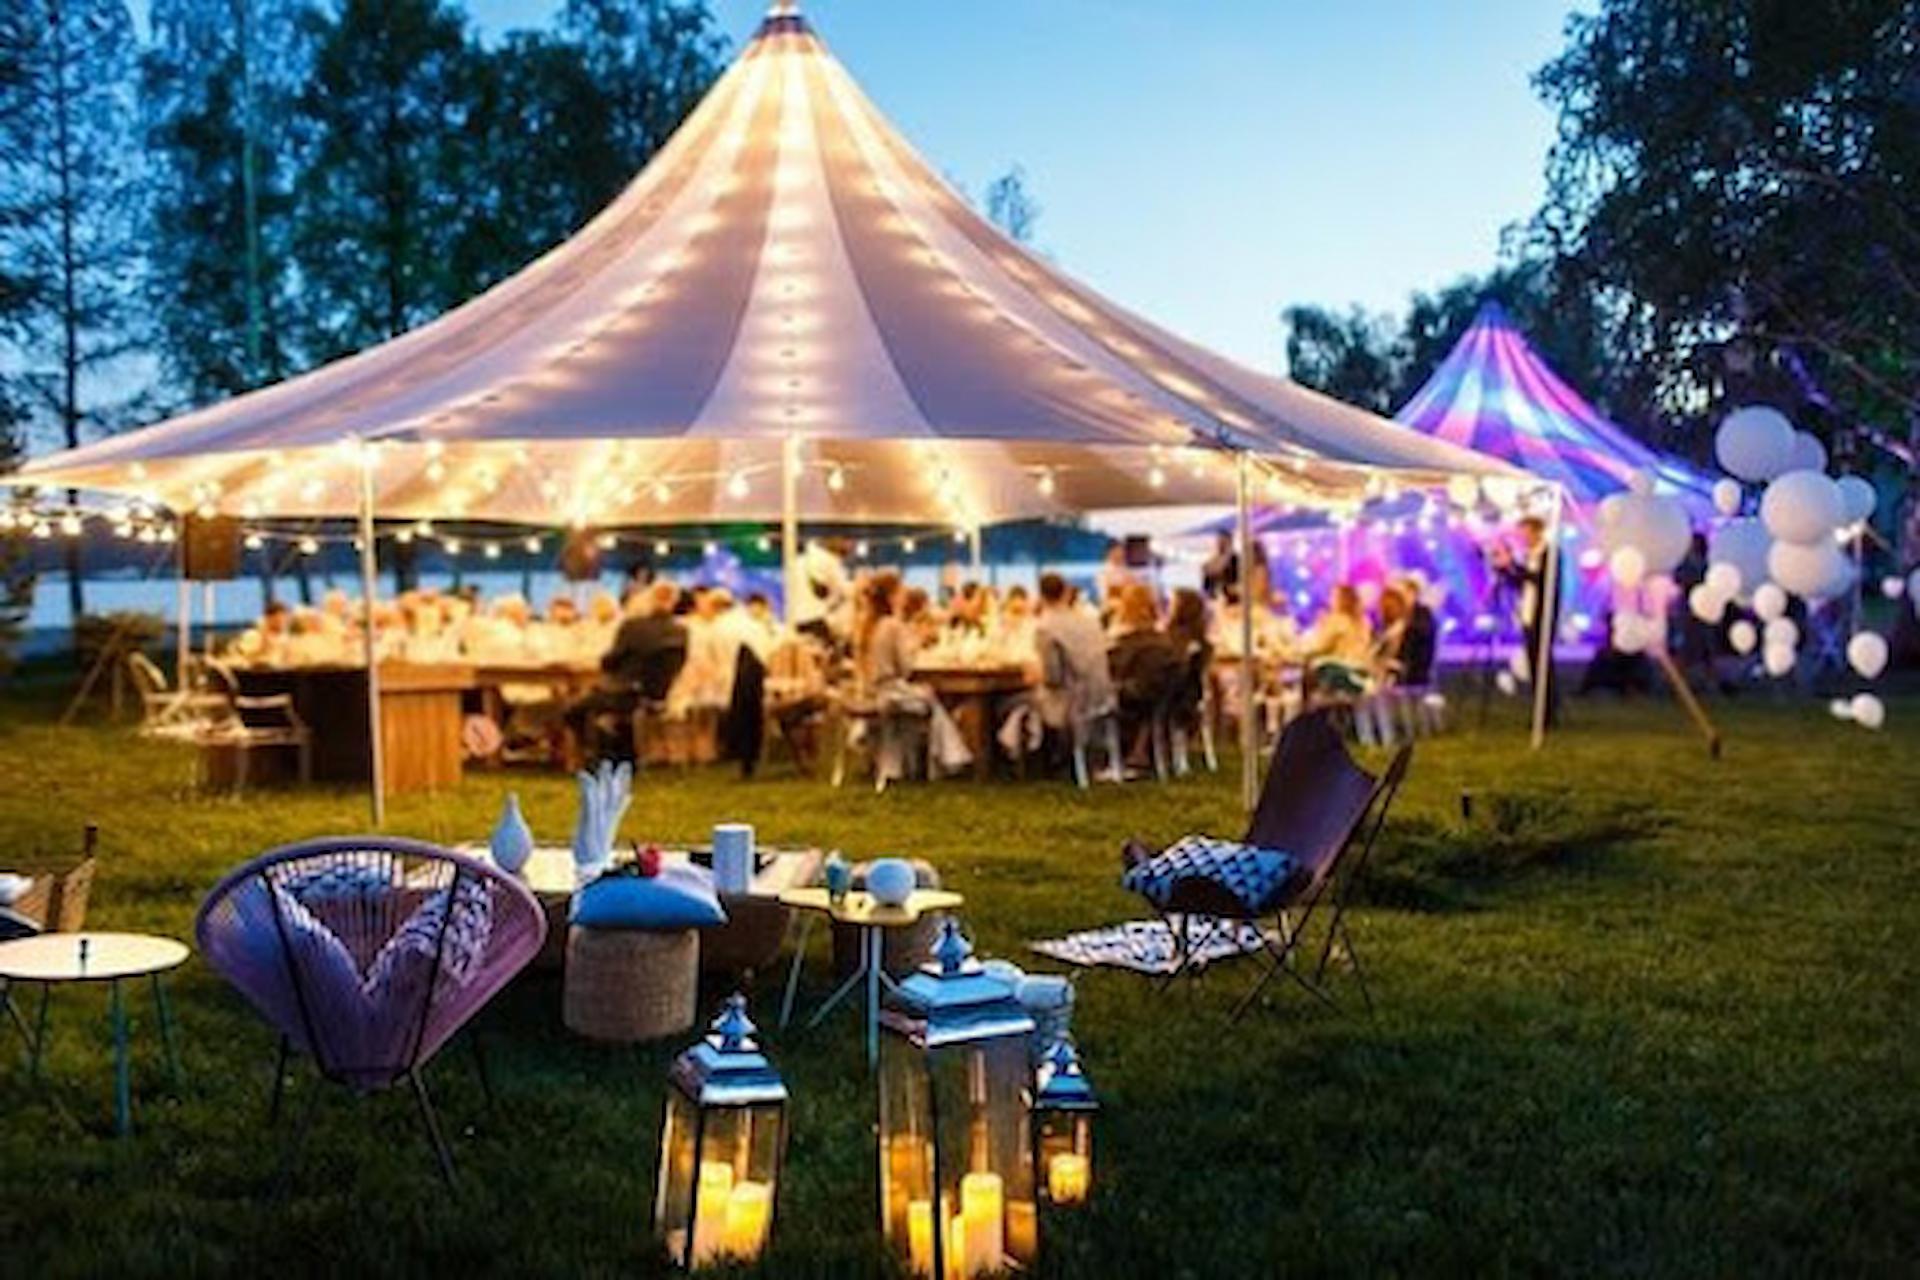 Tent Rentals Company In NY Can Help Alter The Looks Of Open Space